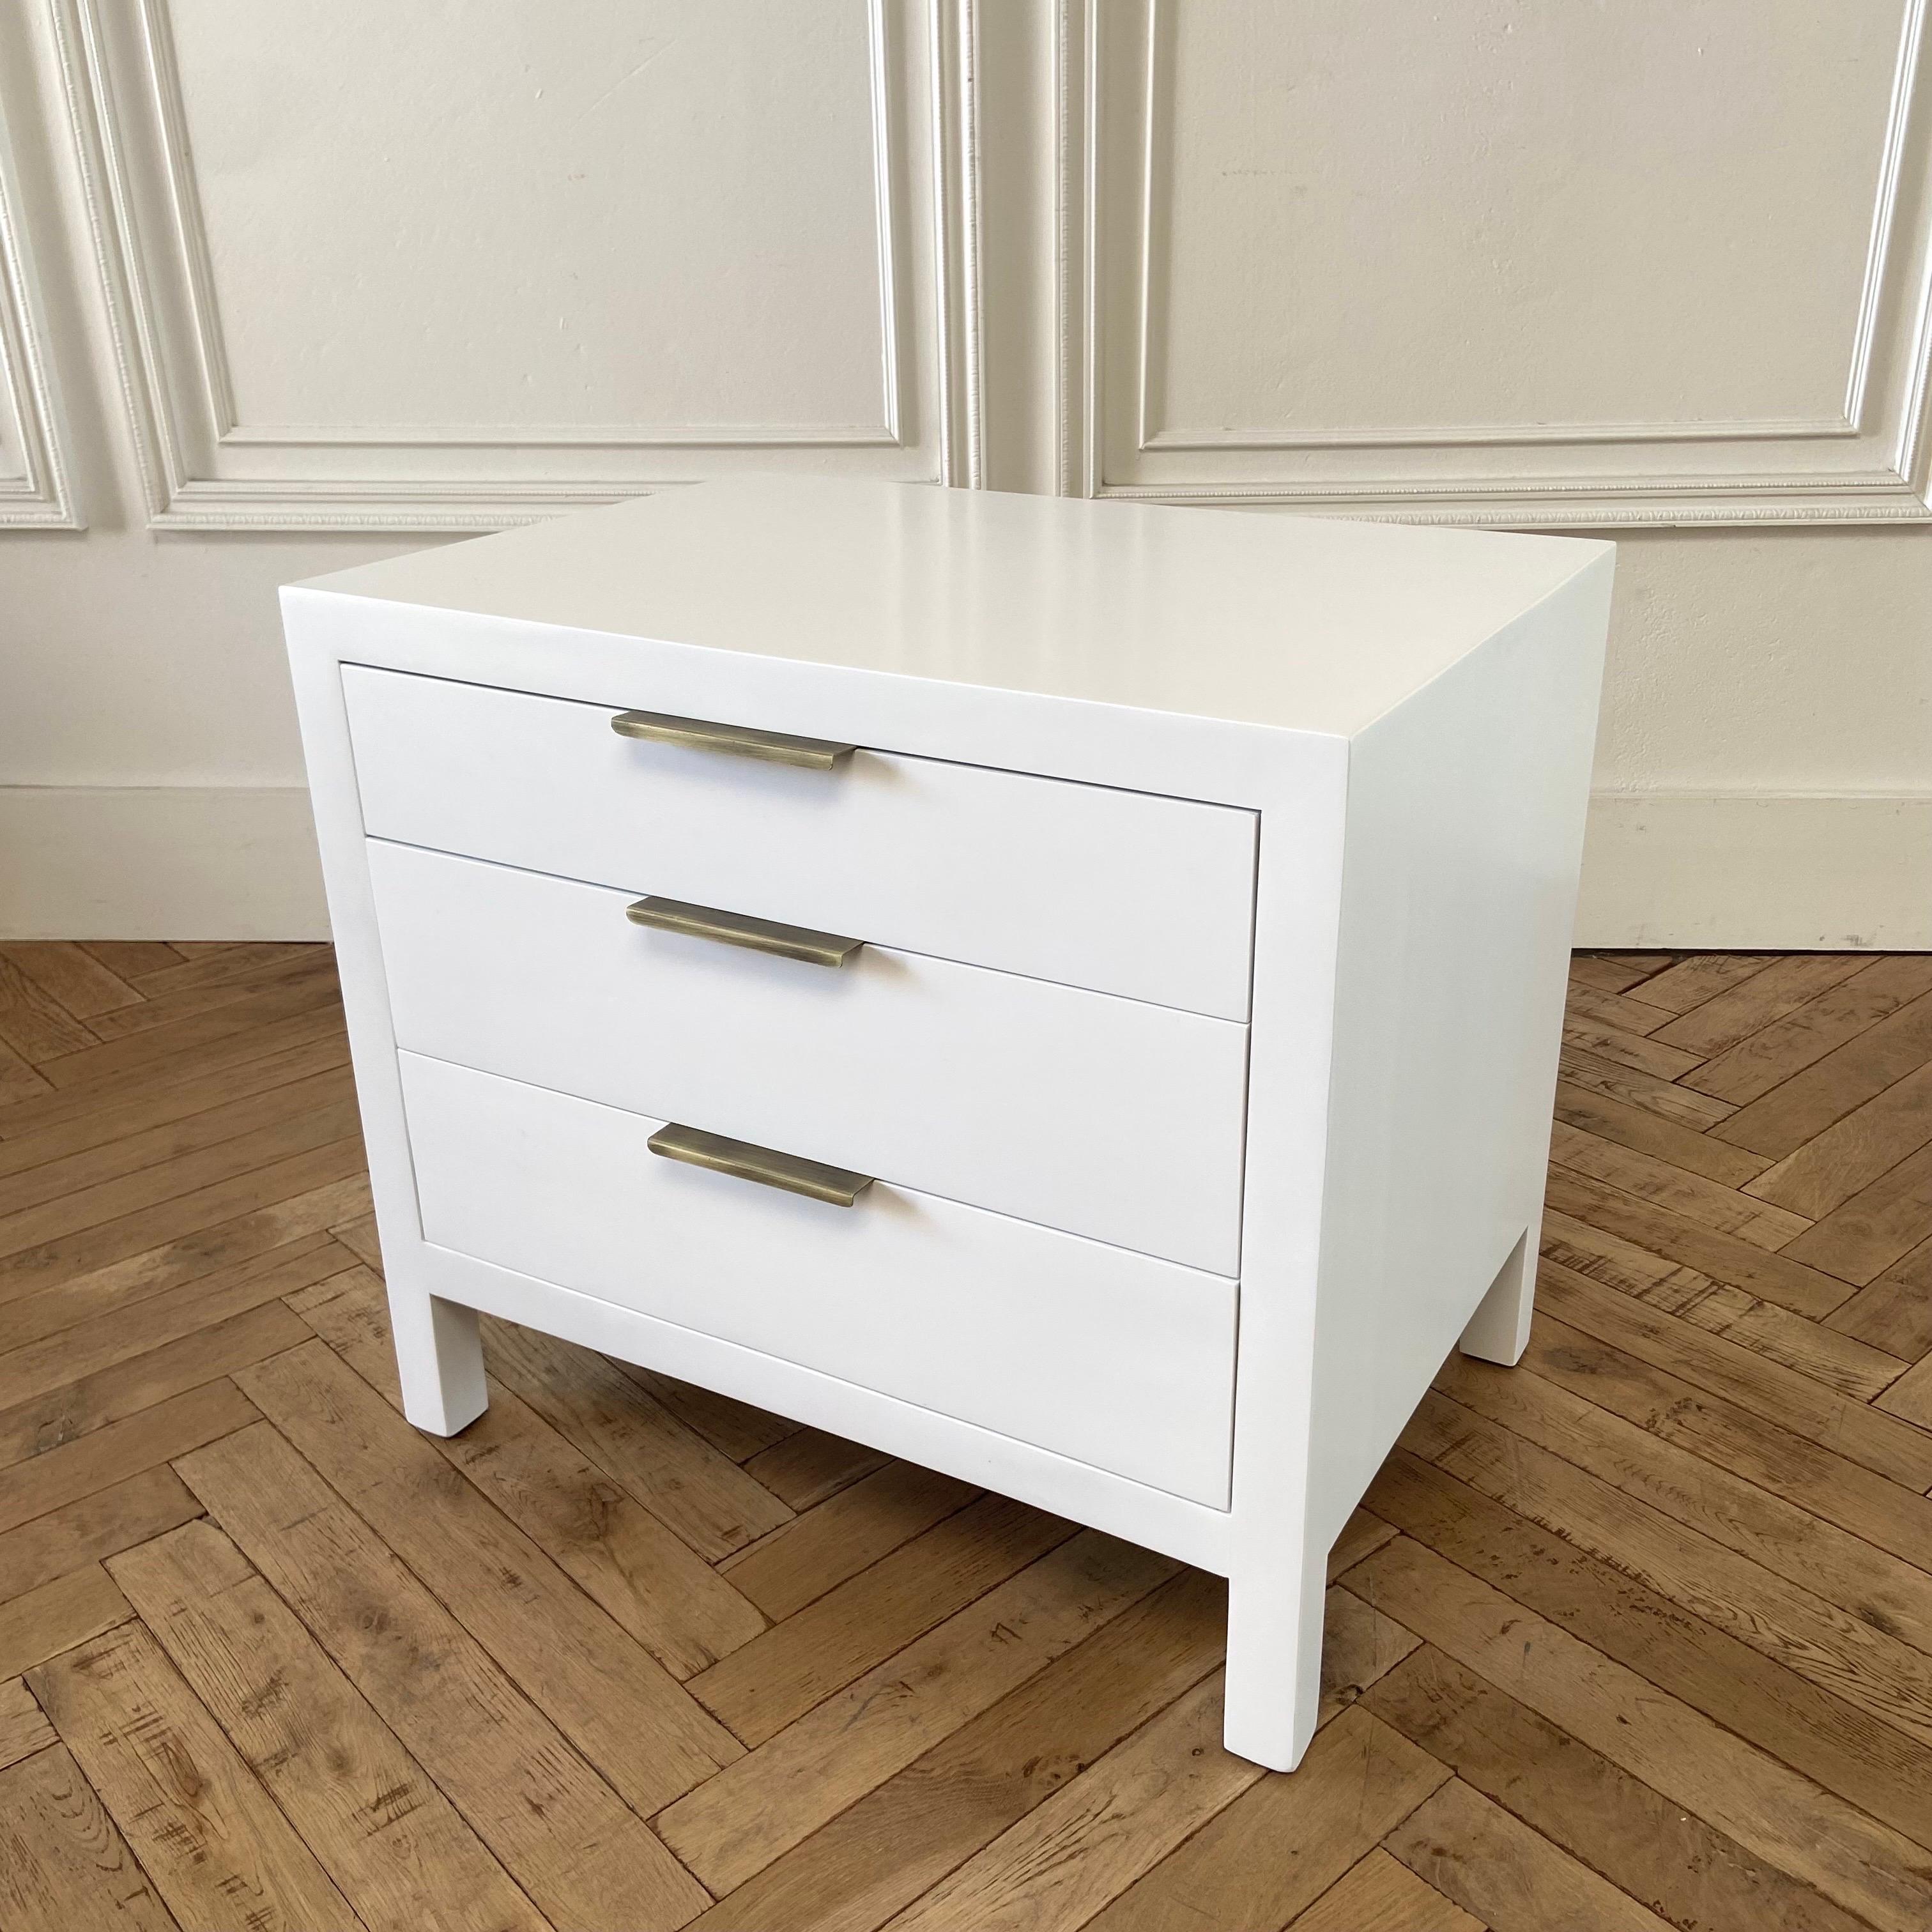 Full customizable available in white or black finish 
Size Shown: 28”W x 20”D x 25”H
Inside Bottom two drawers: 4-1/2”H
Inside Top drawer: 3-1/4”H
Shown with modern pulls, this is an upgrade, the drawers are solid wood with dovetail